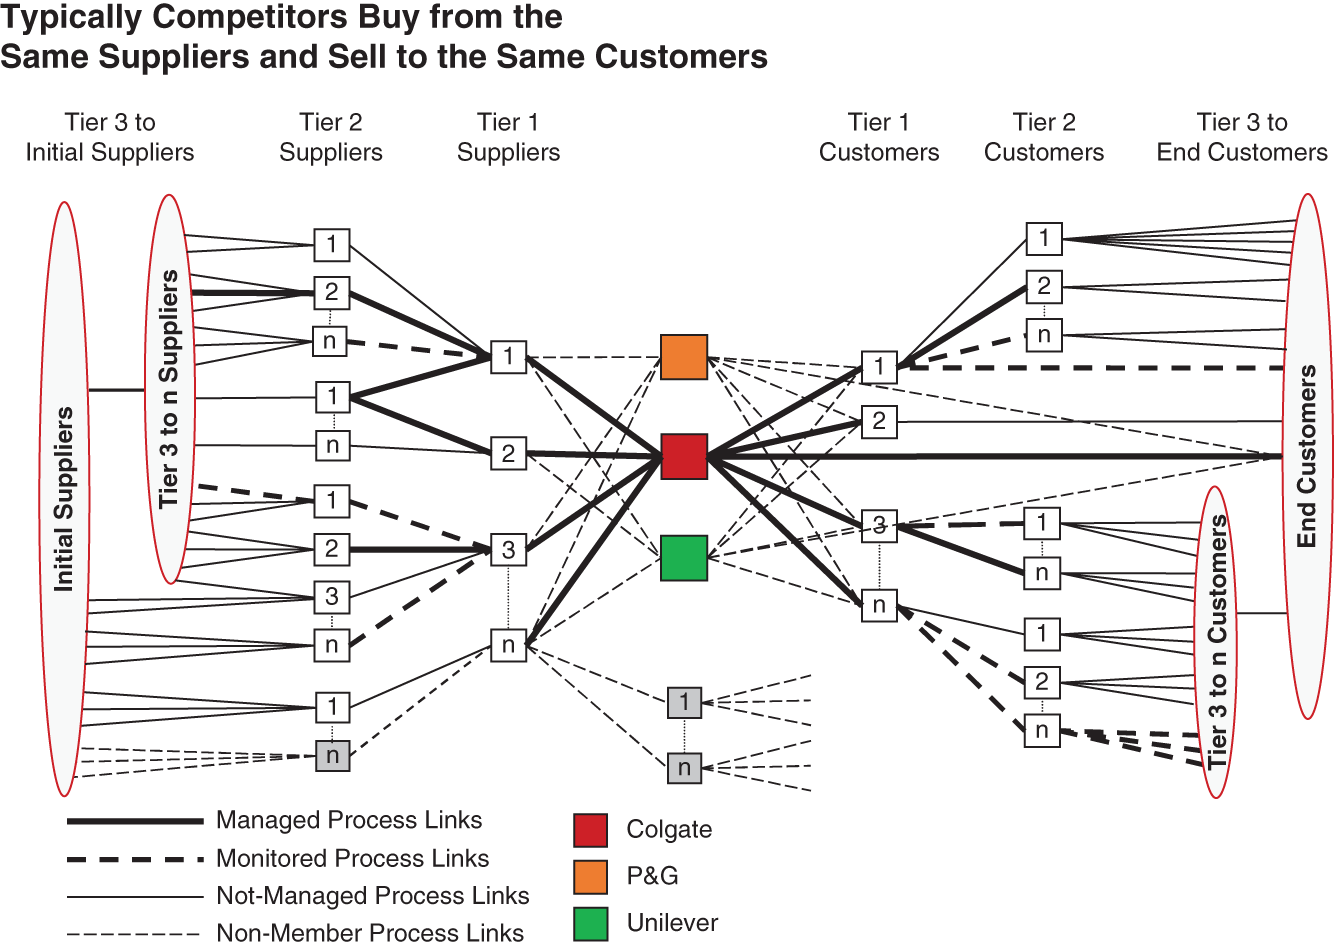 Schematic illustration of Complexity Driven by Participation in Multiple Supply Chains.